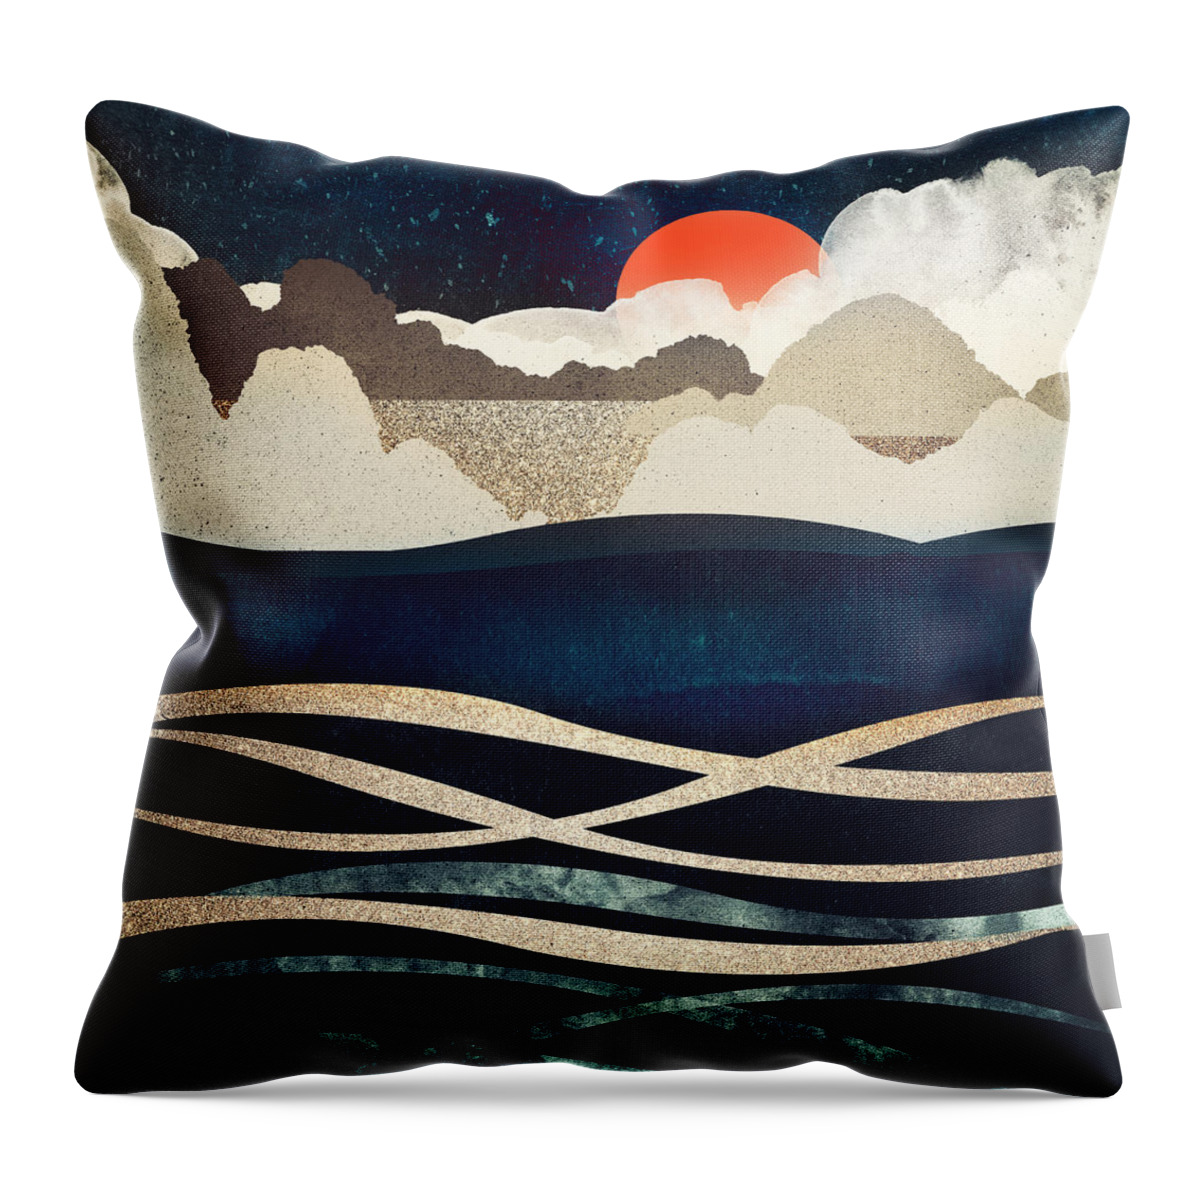 Midnight Throw Pillow featuring the digital art Midnight Beach by Spacefrog Designs